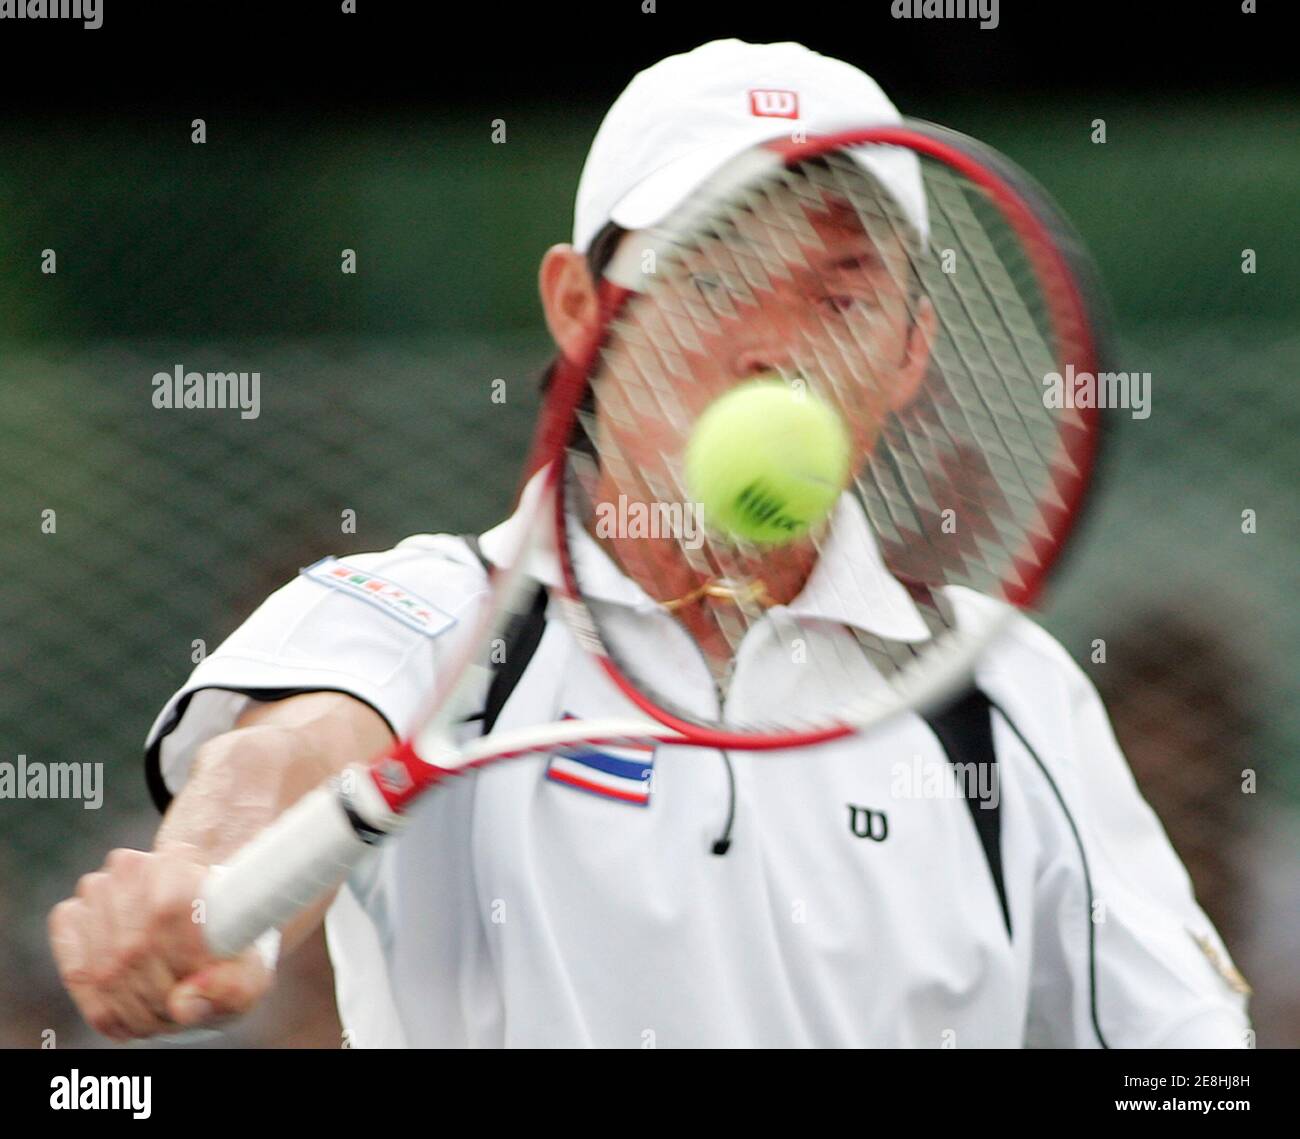 Thailand's Danai Udomchoke hits a shot to Go Soeda of Japan at their Davis Cup Asia/Oceania group One, second round tennis match in Bangkok April 7, 2006. REUTERS/Chaiwat Subprasom Stock Photo